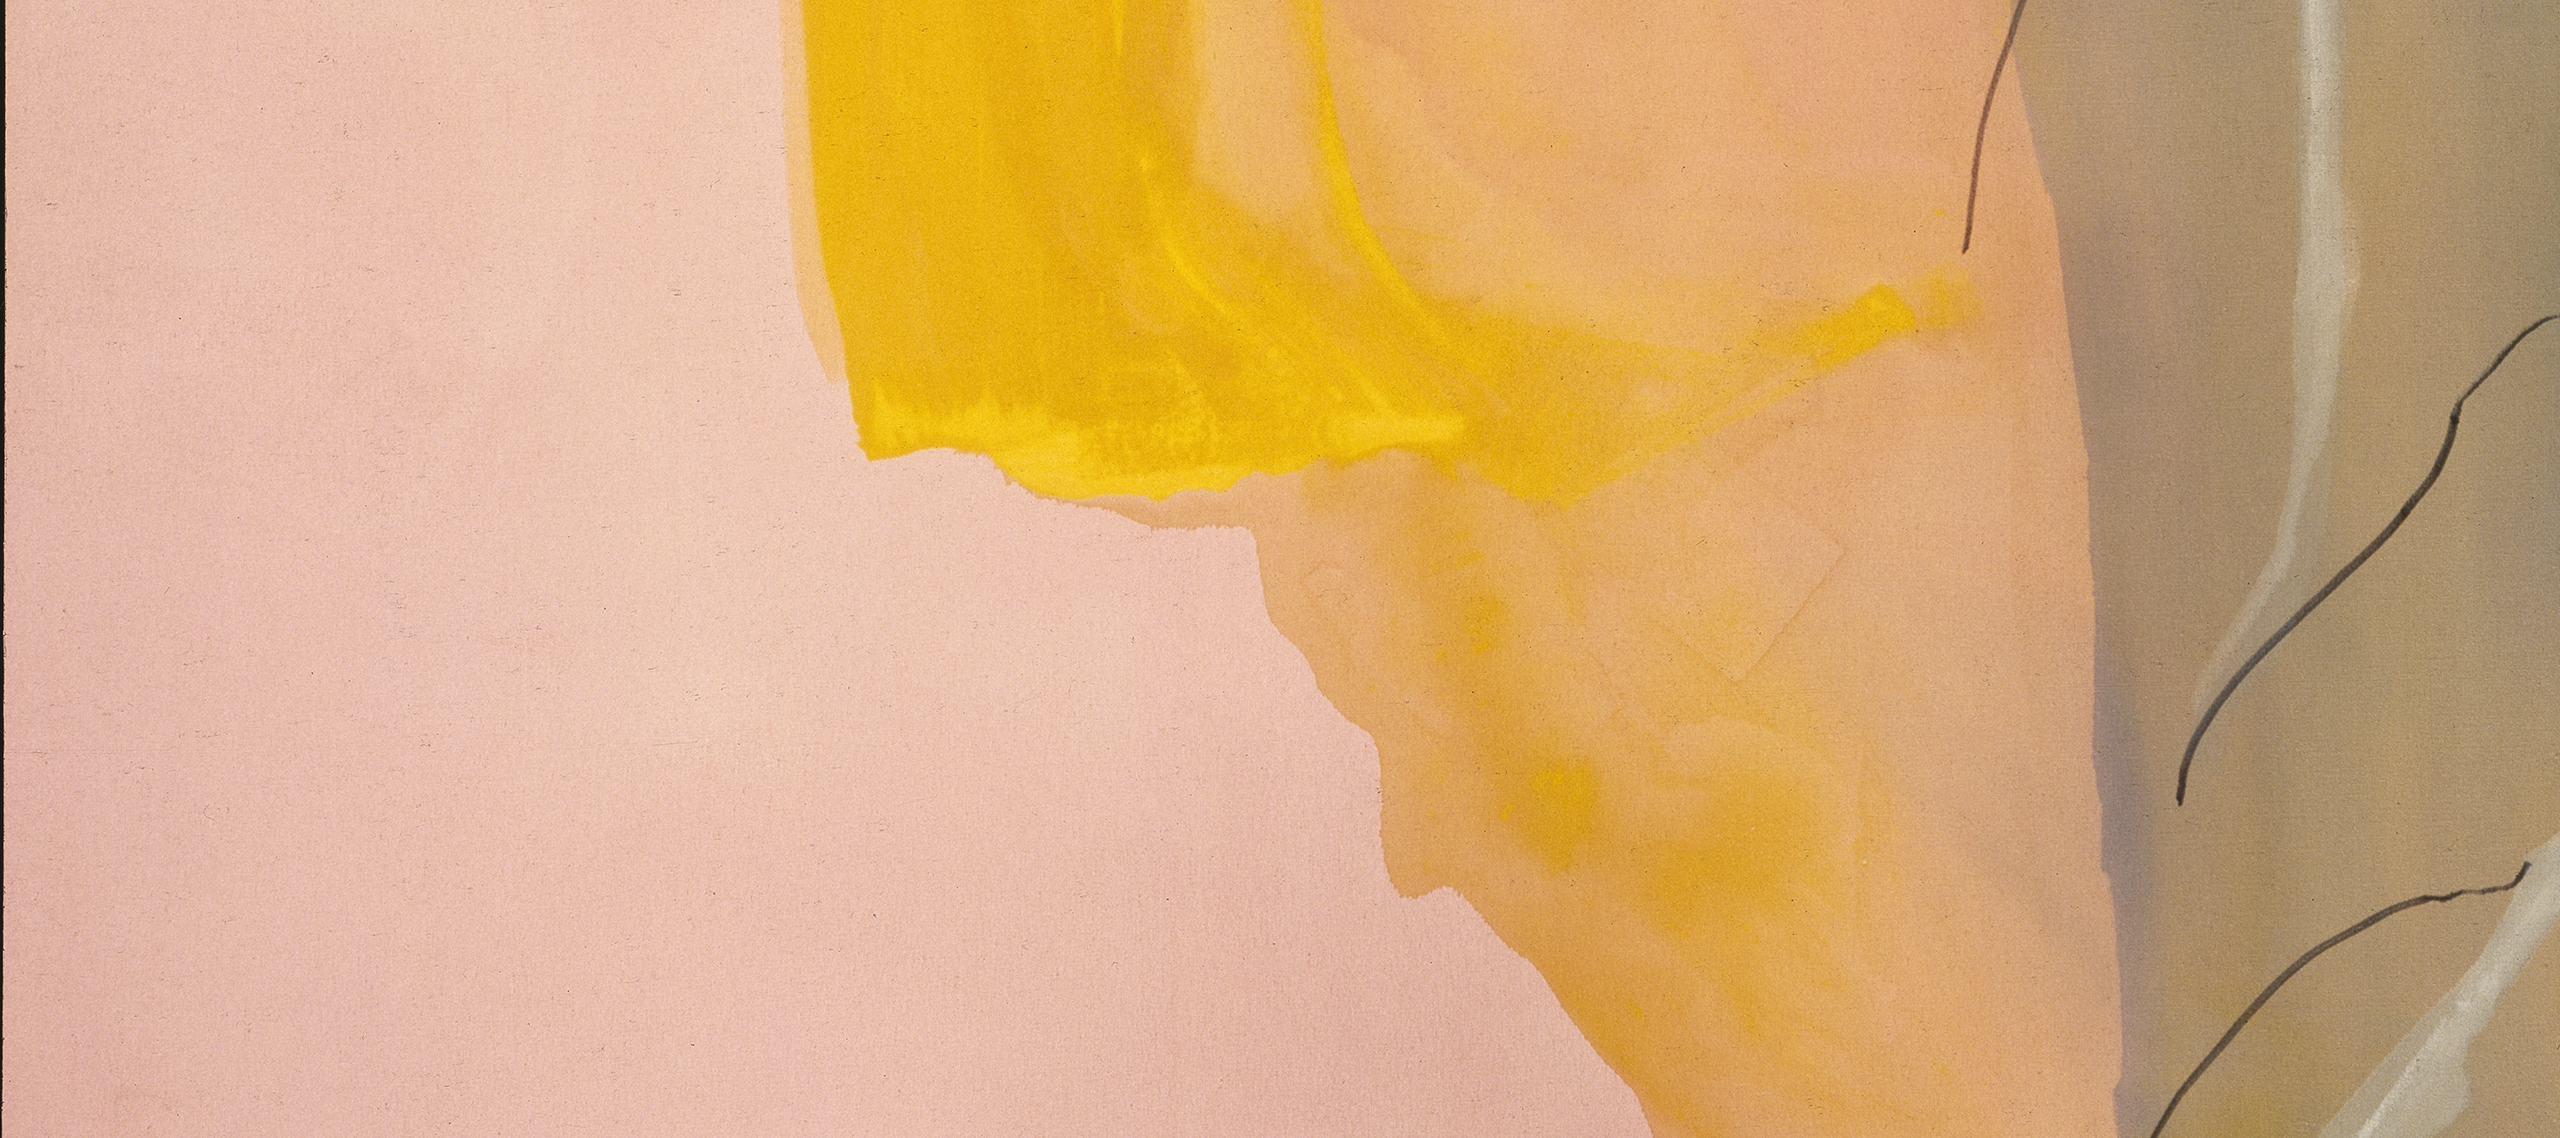 Large vertical painting in minimalist style features thinned pigments poured in translucent layers onto the unsized canvas. The abstract composition is dominated by a central ambiguous form in vibrant yellow-orange and peach, flanked by amorphous swaths of pale pink and a dark gray.